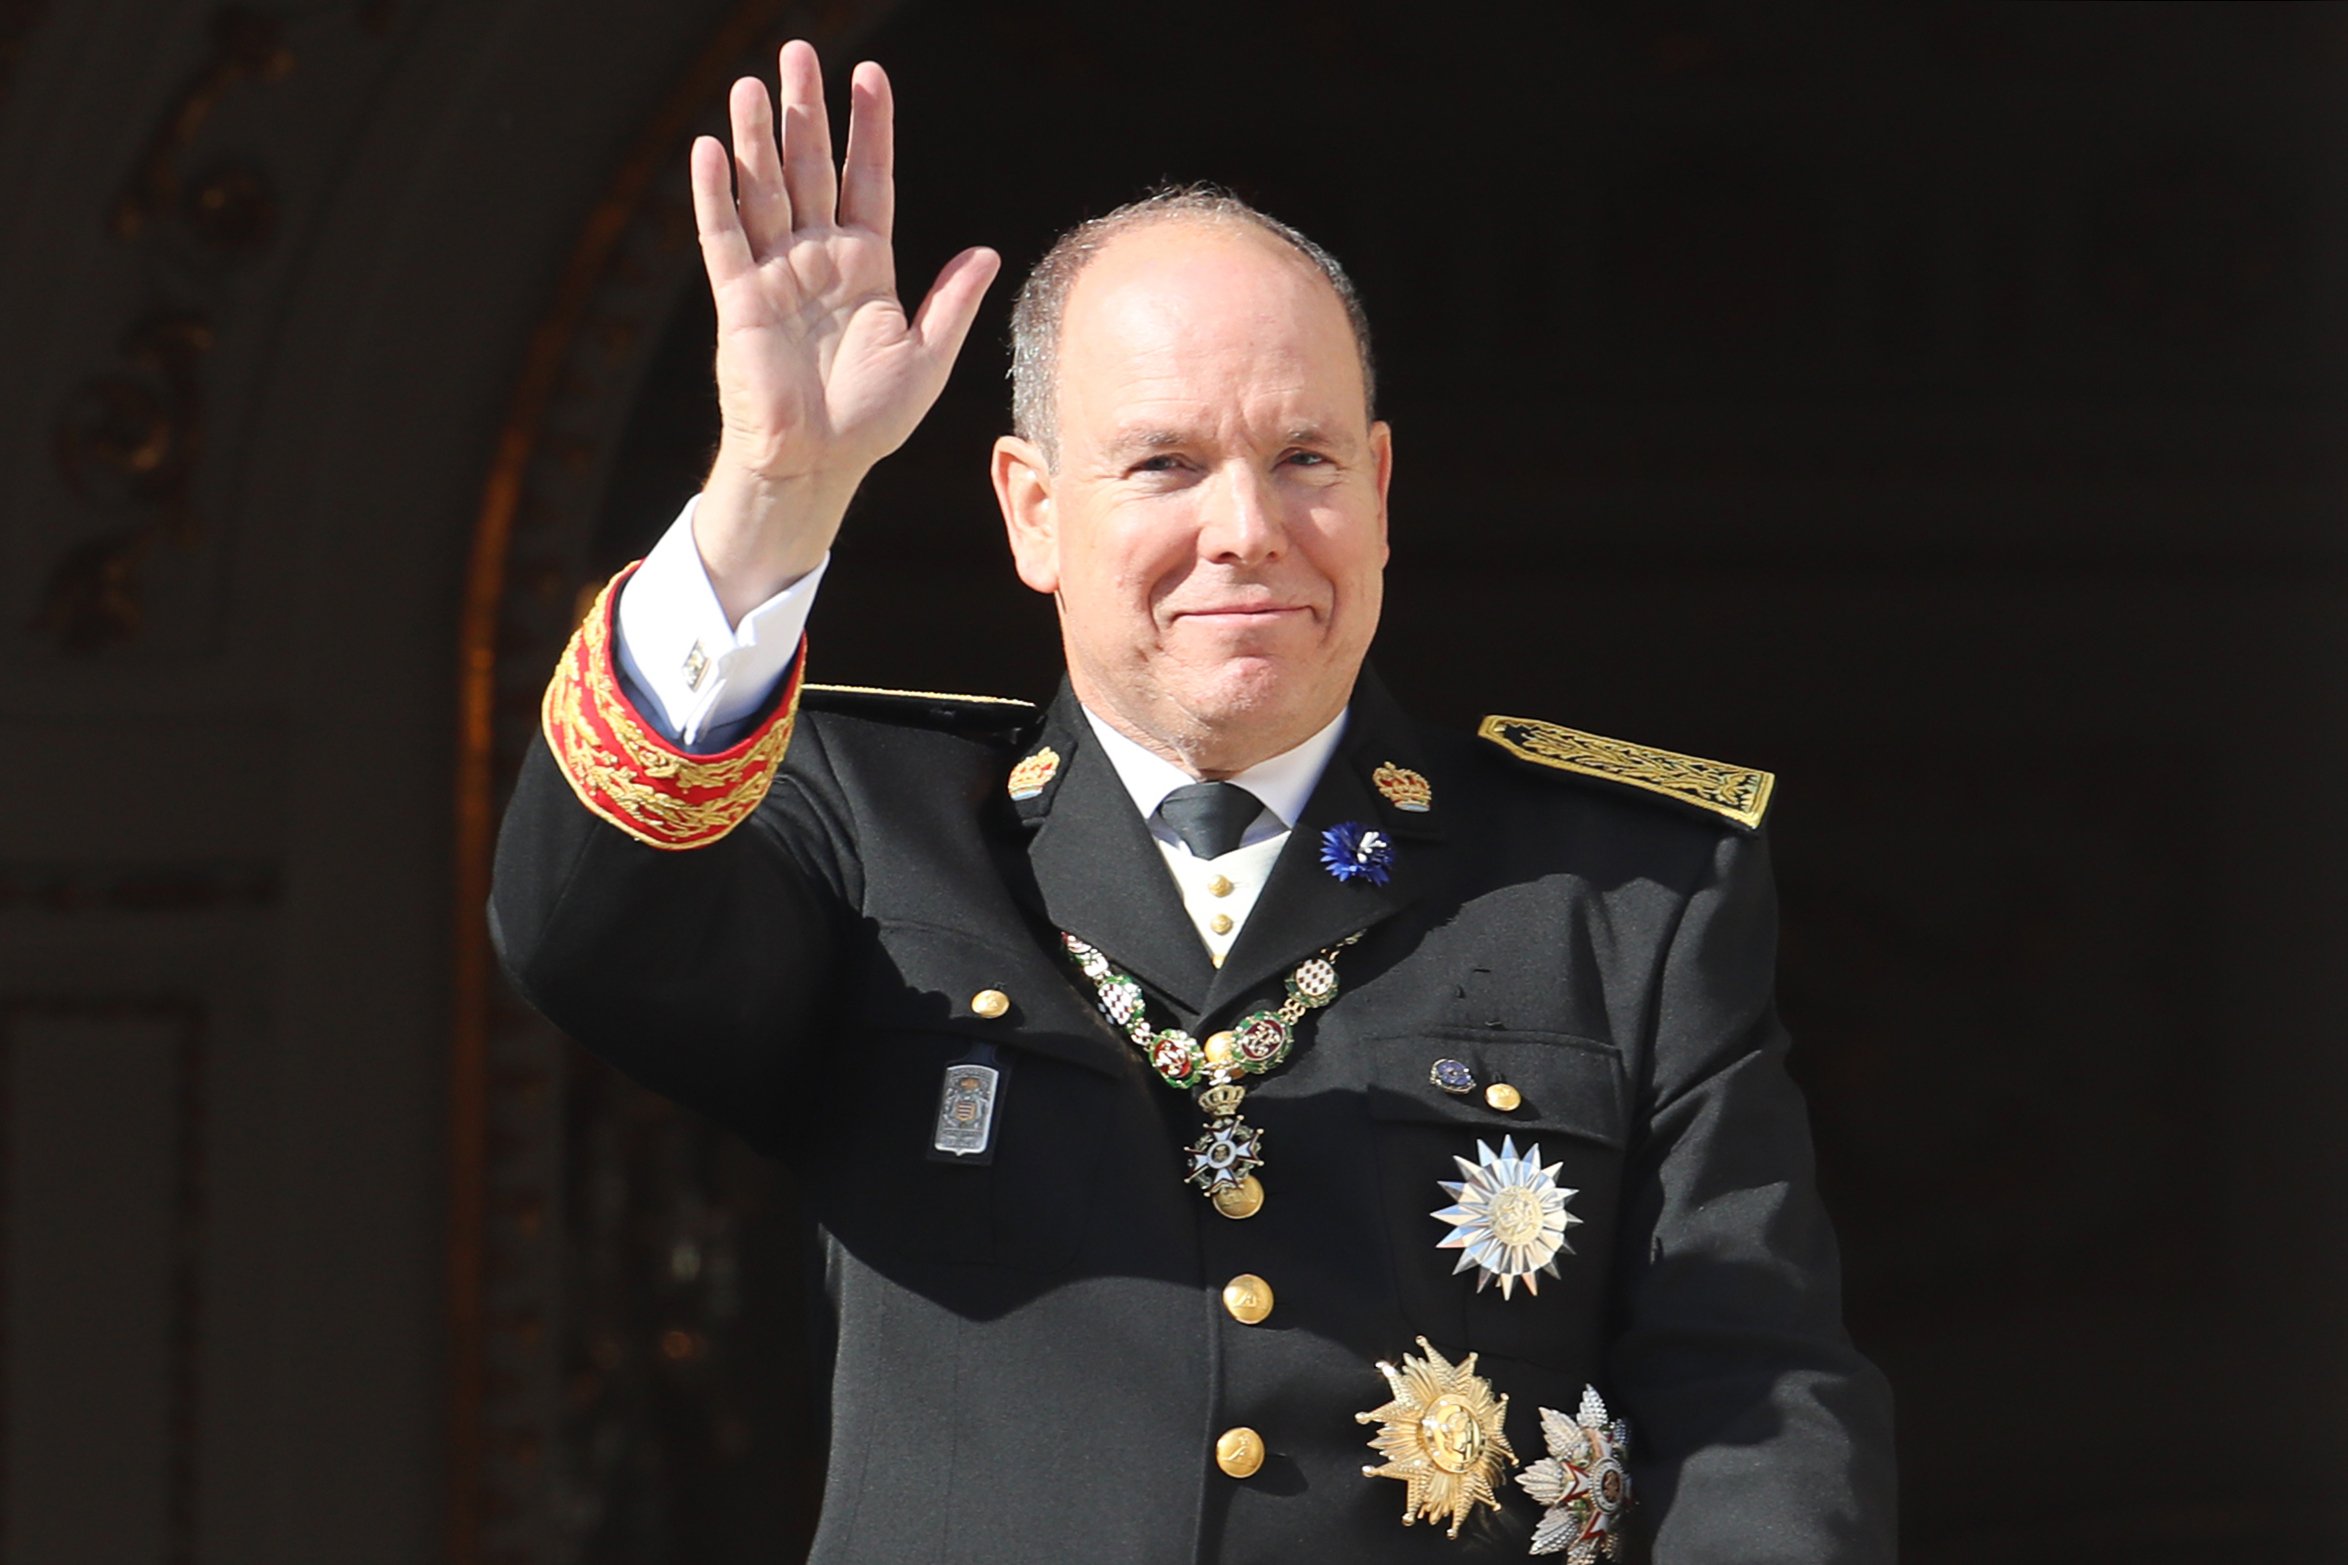 Prince Albert II of Monaco during the celebrations marking Monaco's National Day, on November 19, 2018 in Monaco. | Source: Getty Images